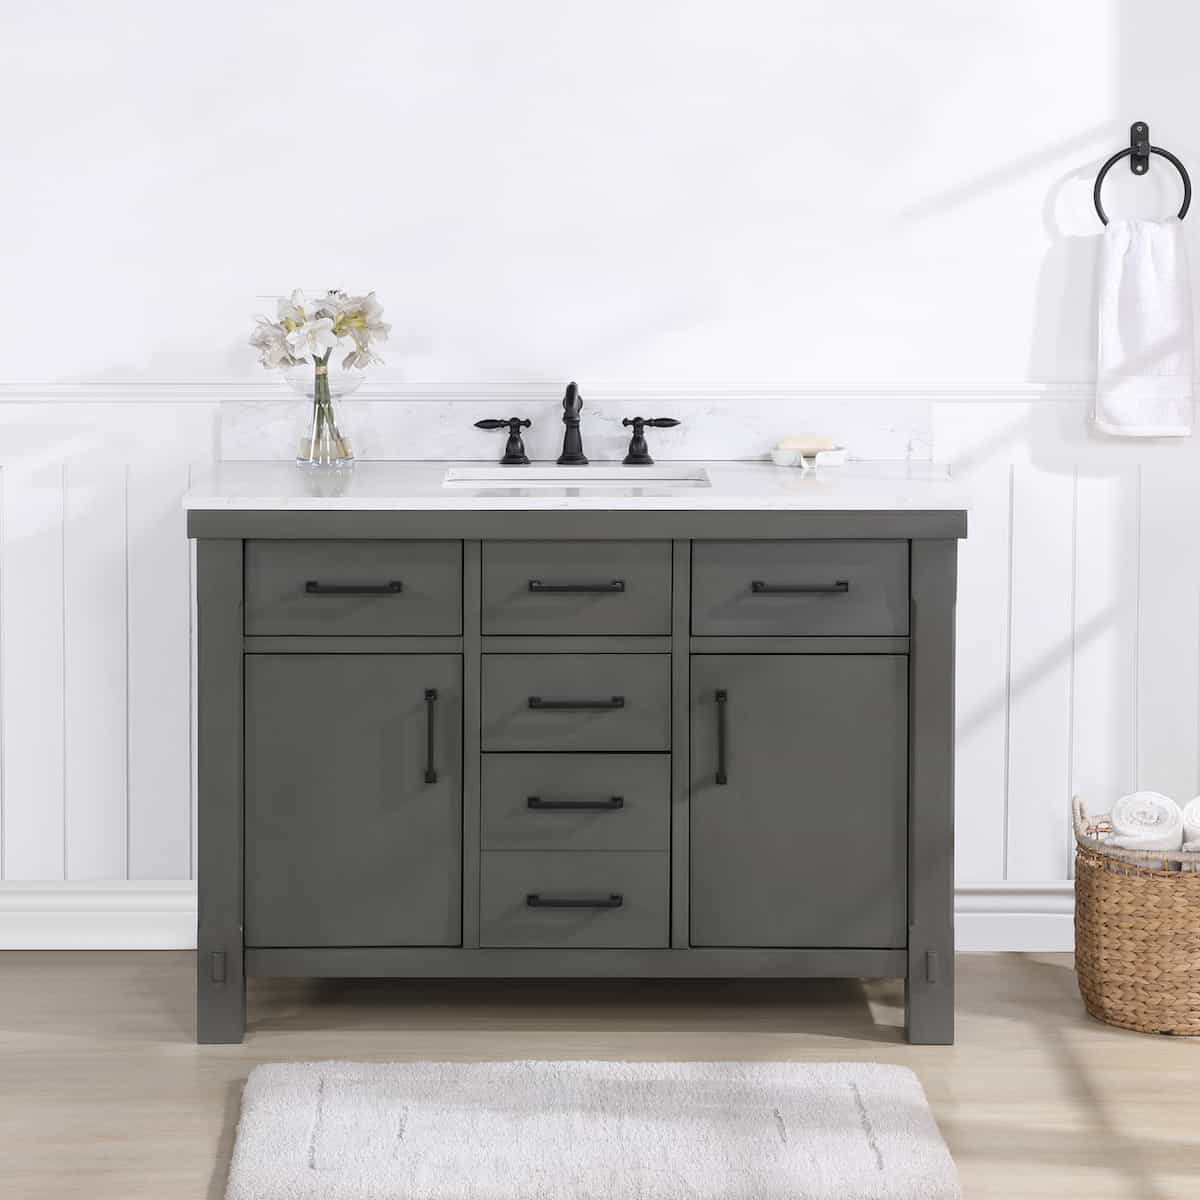 Vinnova Viella 48 Inch Freestanding Single Sink Bath Vanity in Rust Grey Finish with White Composite Countertop Without Mirror in Bathroom 701848-RU-WS-NM